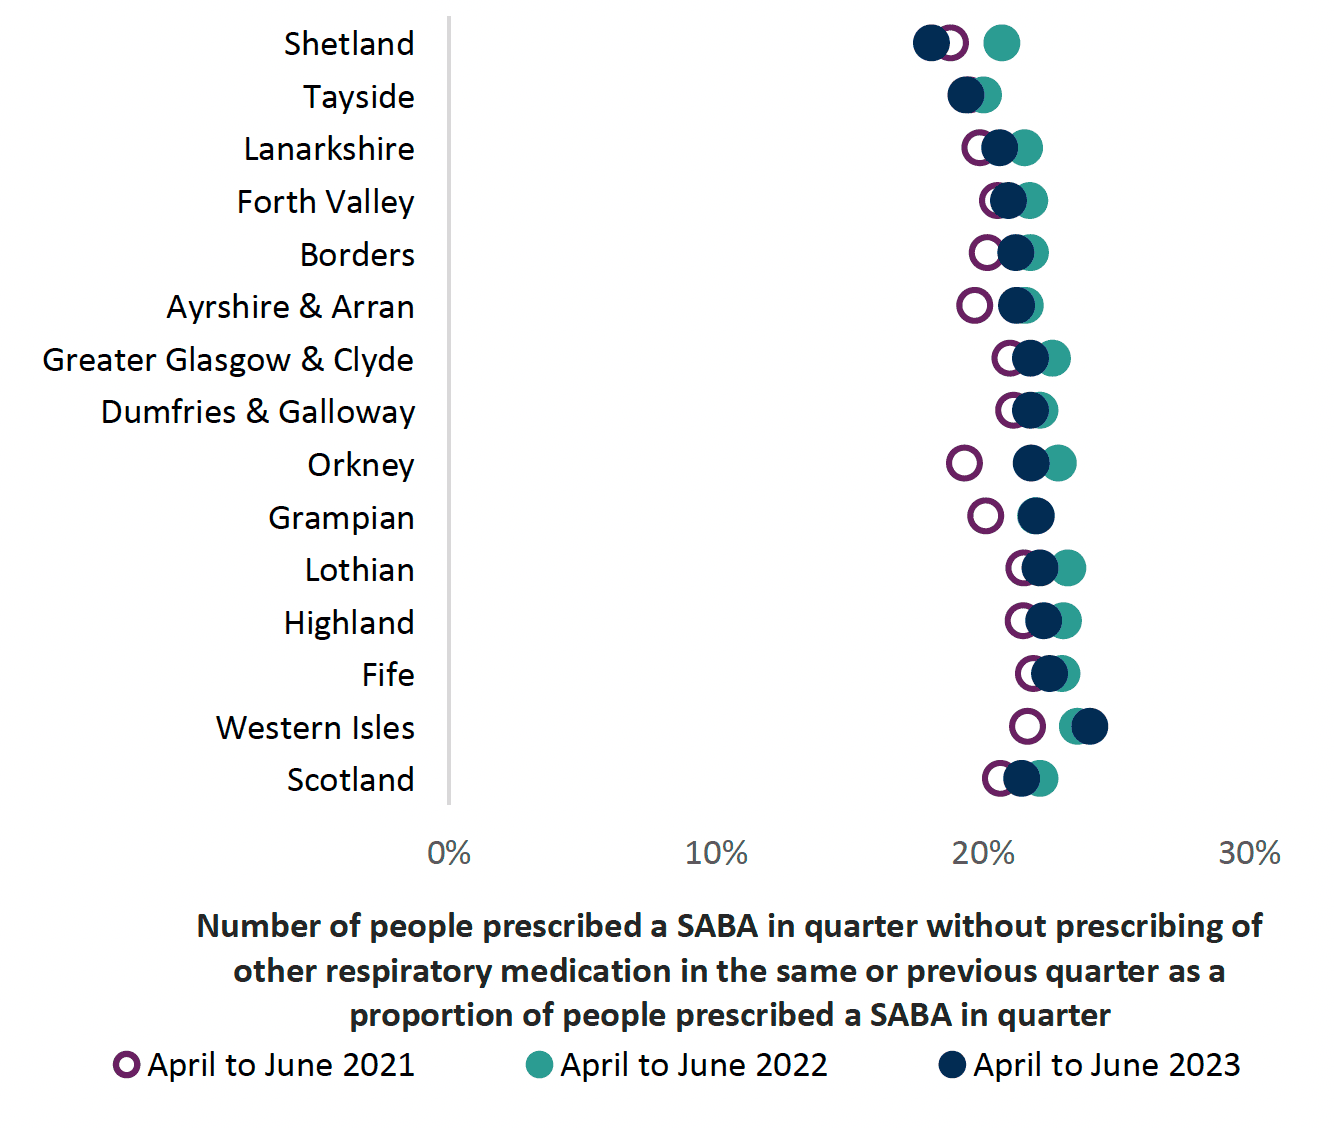 Chart showing number of people prescribed SABA only in absence of other inhalers across health boards and Scotland from 2021 to 2023. Overall Scotland trend is increasing